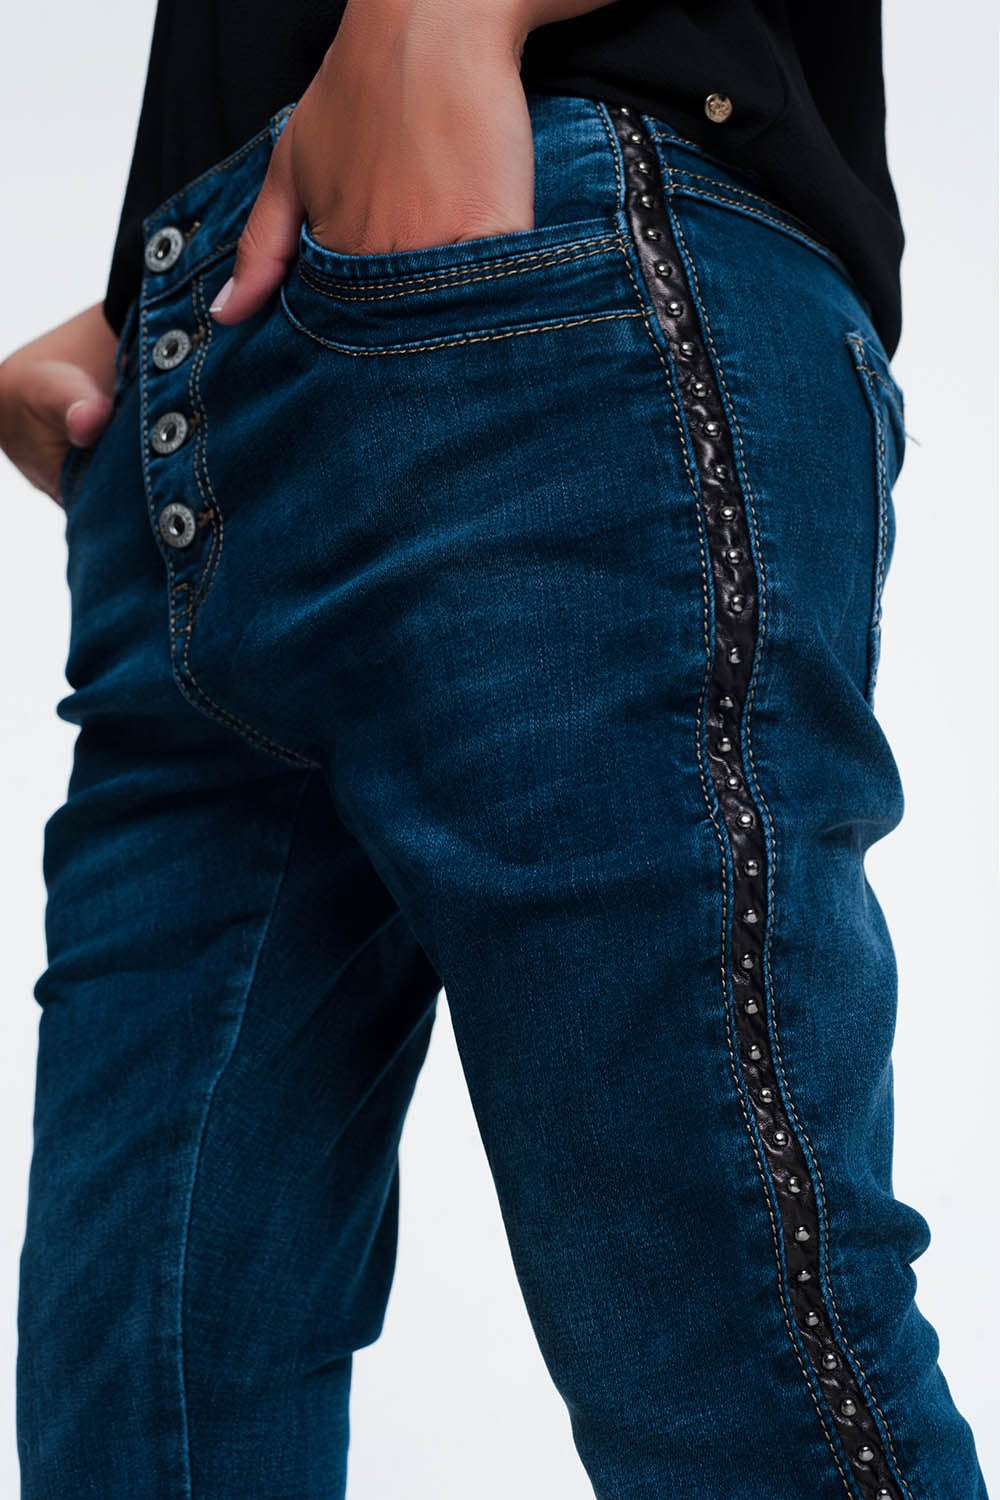 leather look studded JeansJeans